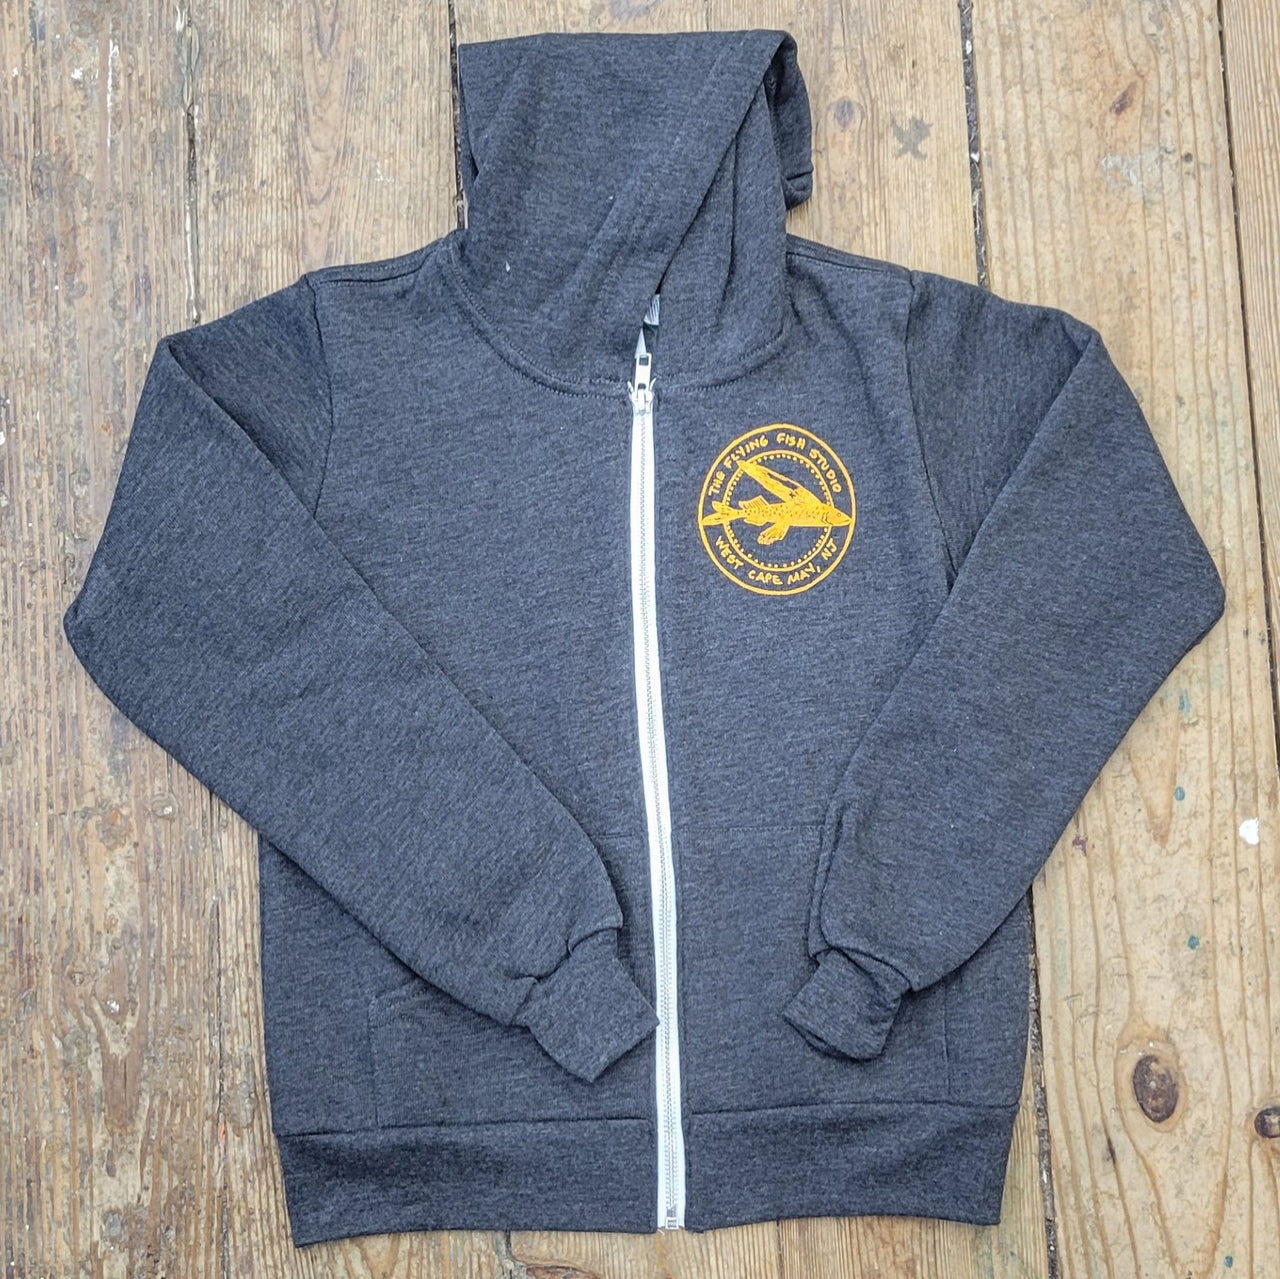 Heather, Dark Grey zip-up jacket featuring the 'Flying Fish' logo design on the left chest in soft orange ink.